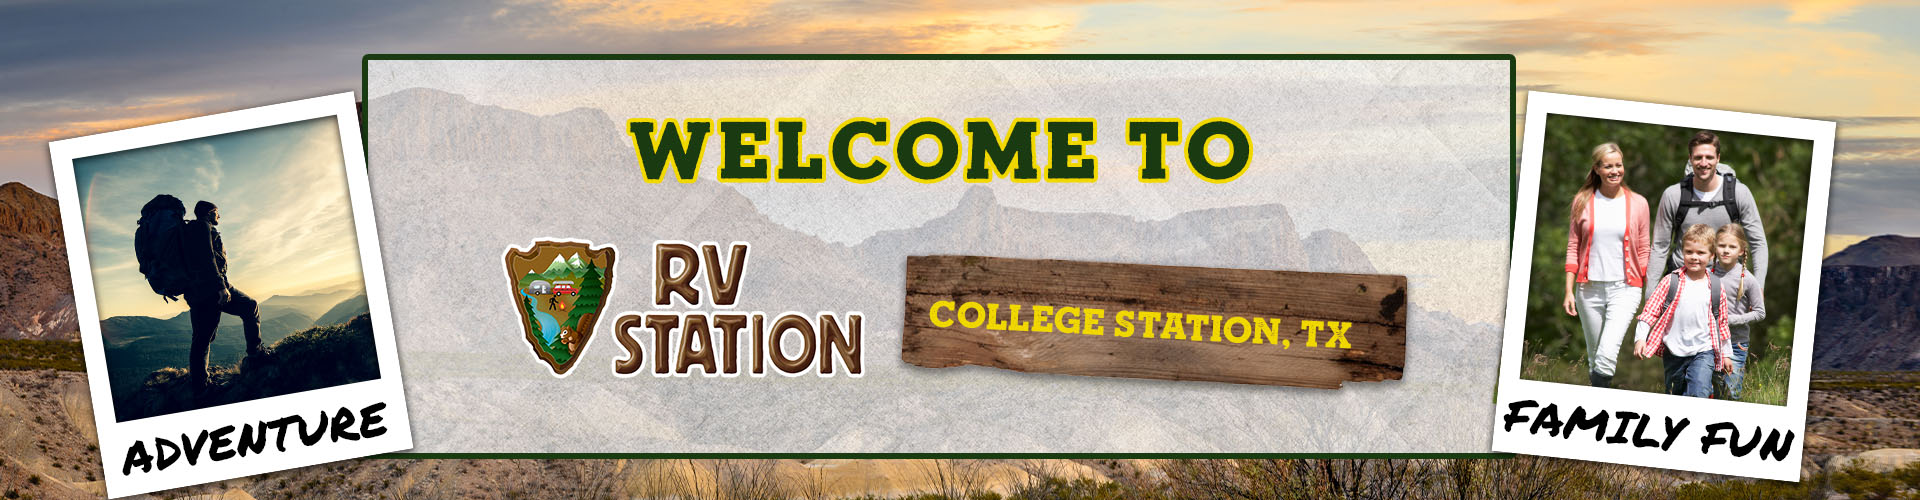 Welcome RV Station - College Station